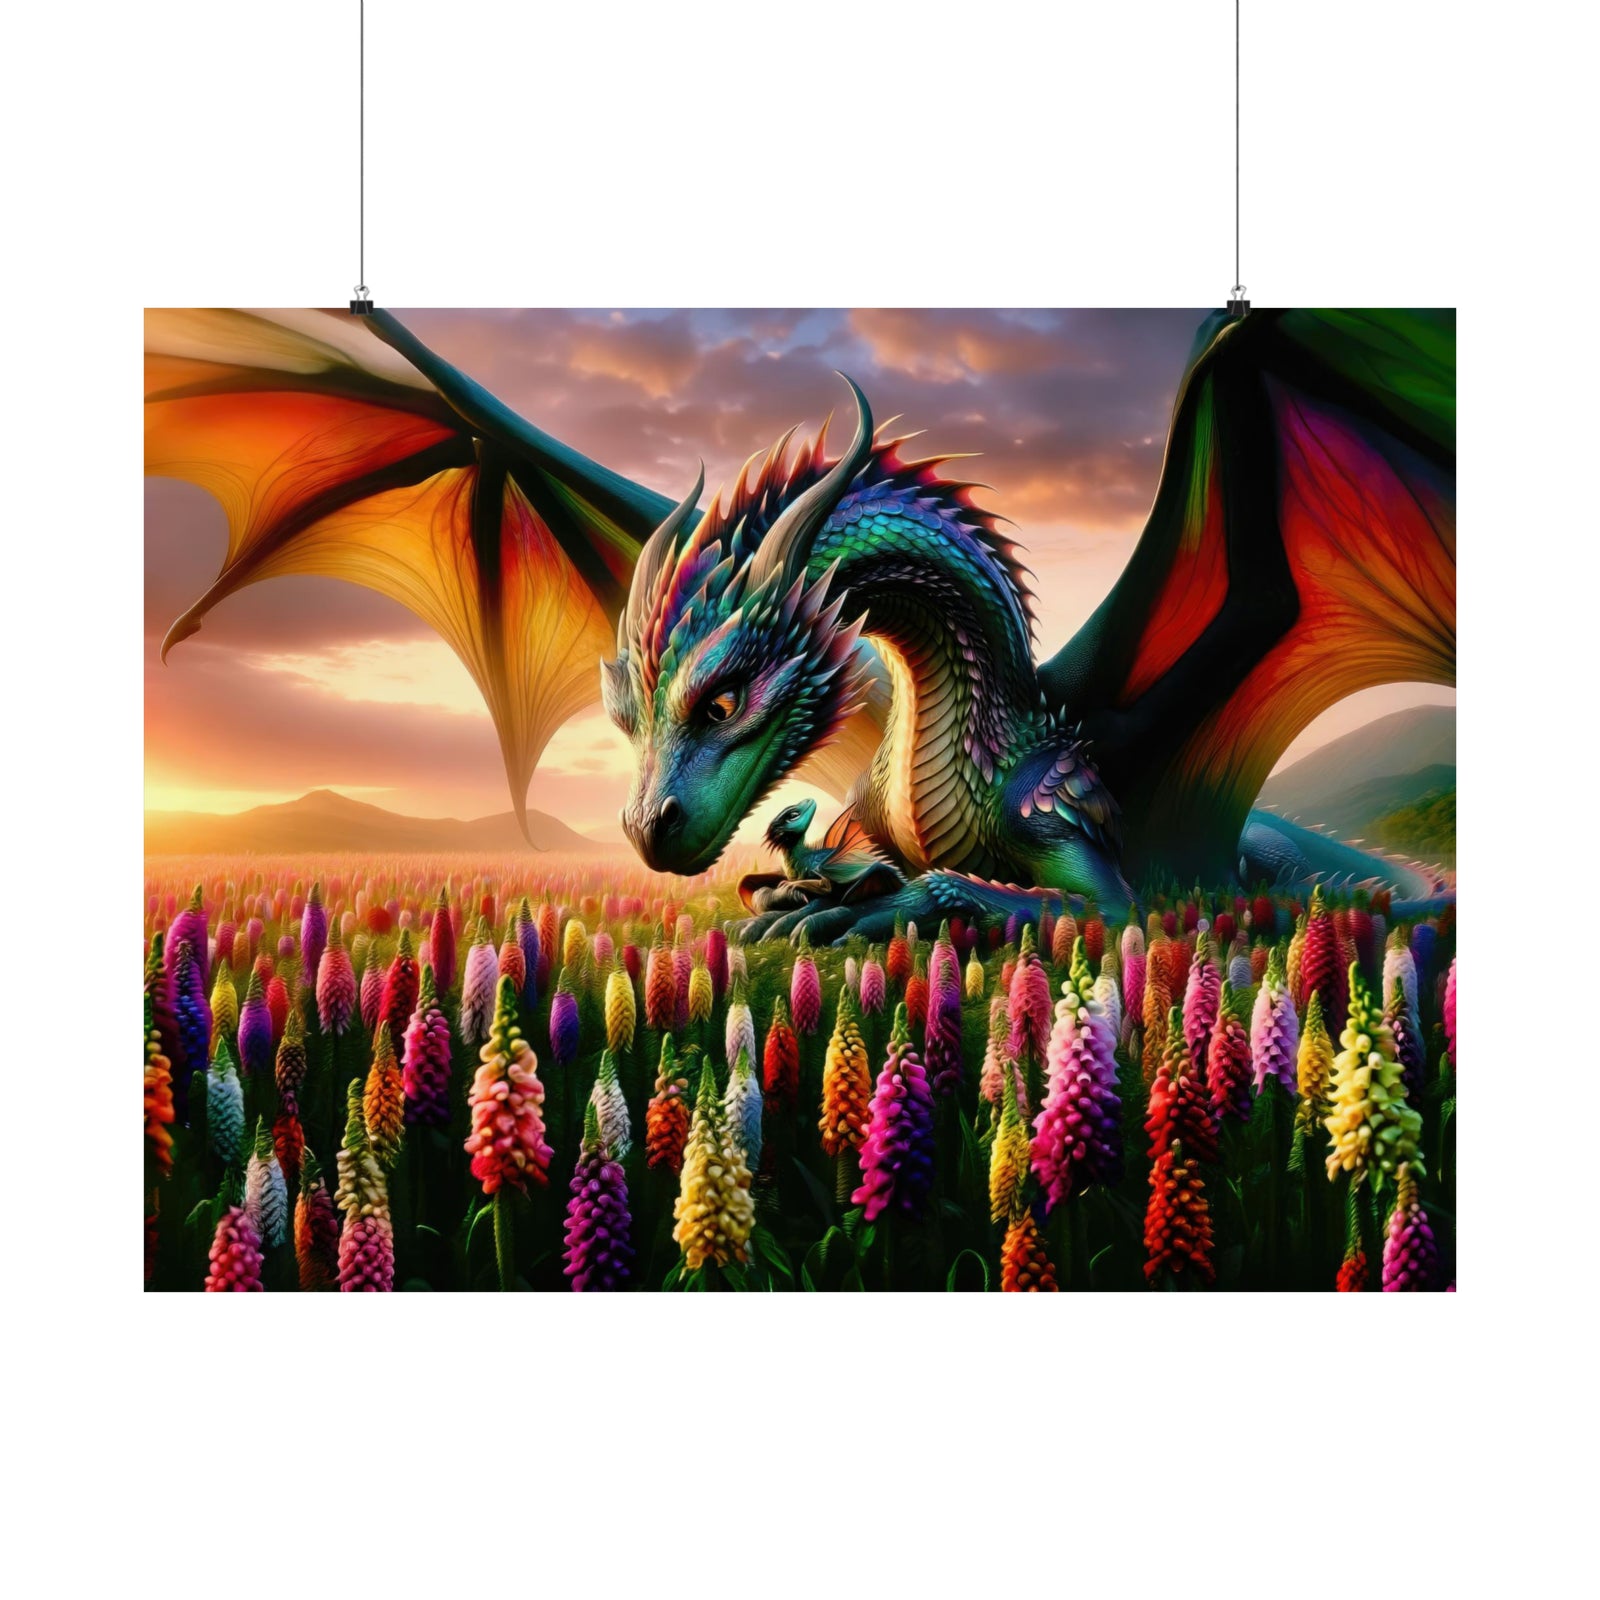 Guardian's Embrace at Snapdragon Vale Poster